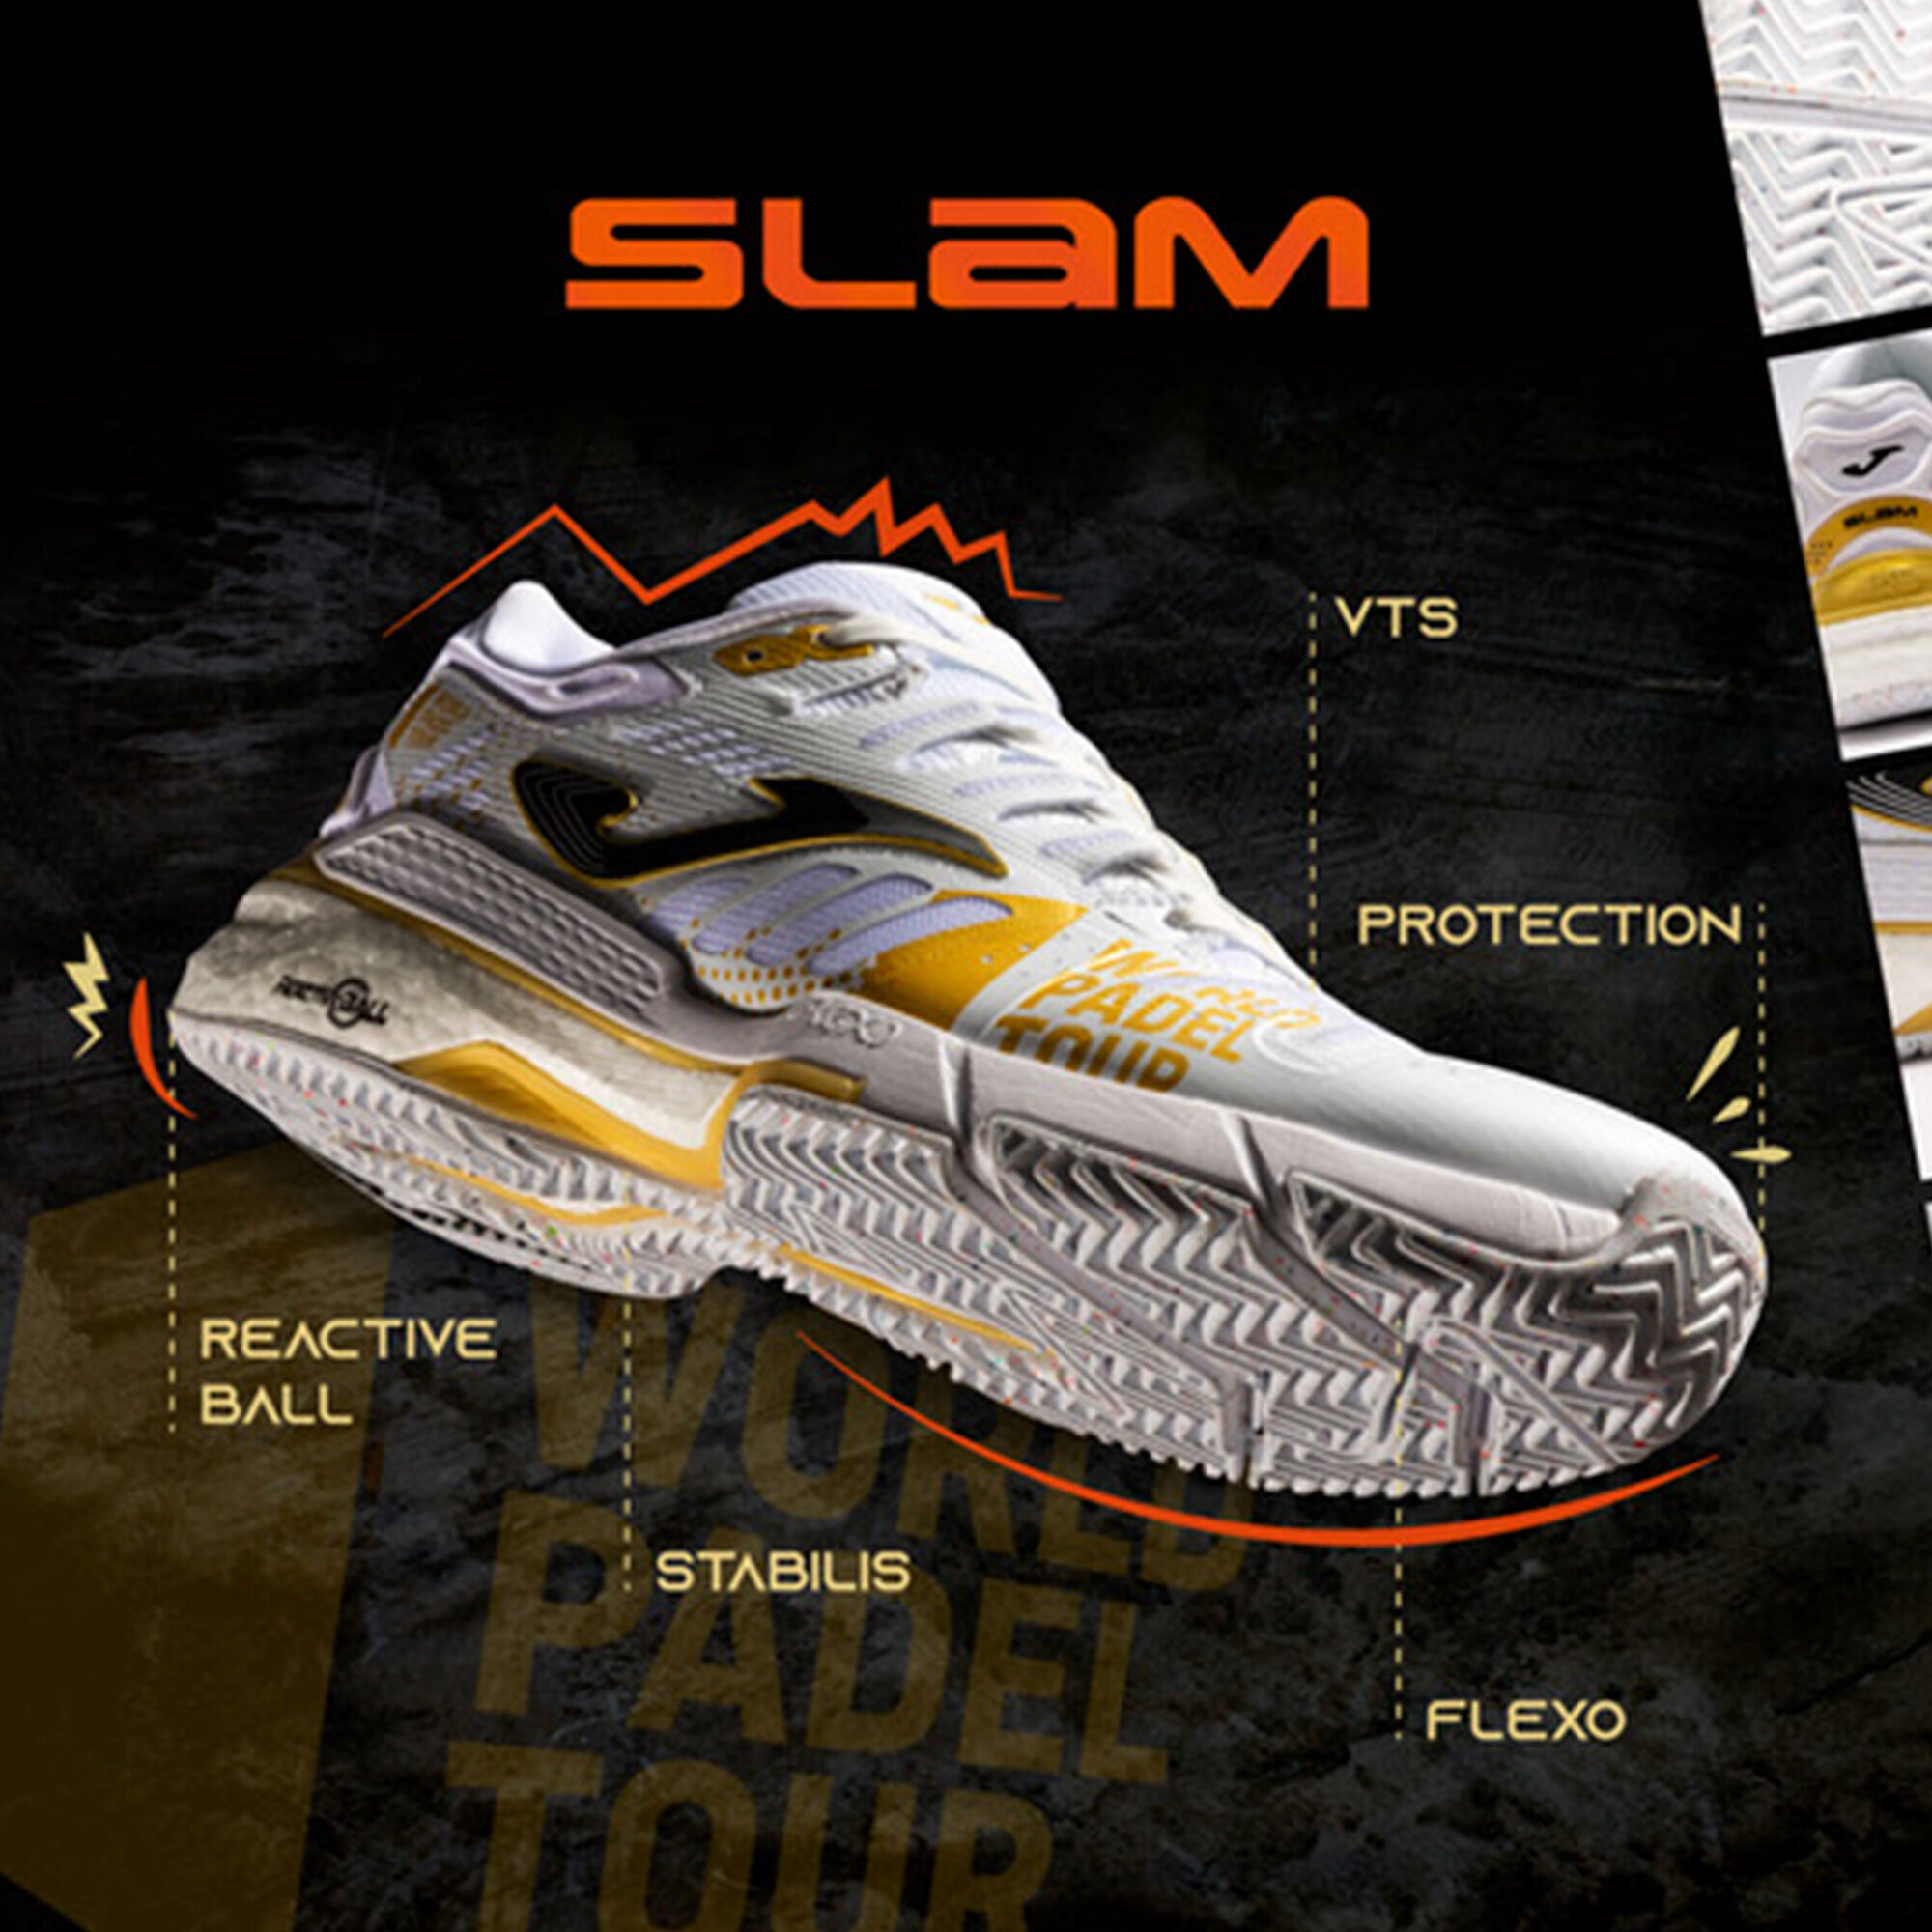 CHAUSSURES SLAM 22 WORLD PADEL TOUR TERRE BATTUE HOMME BLANC OR